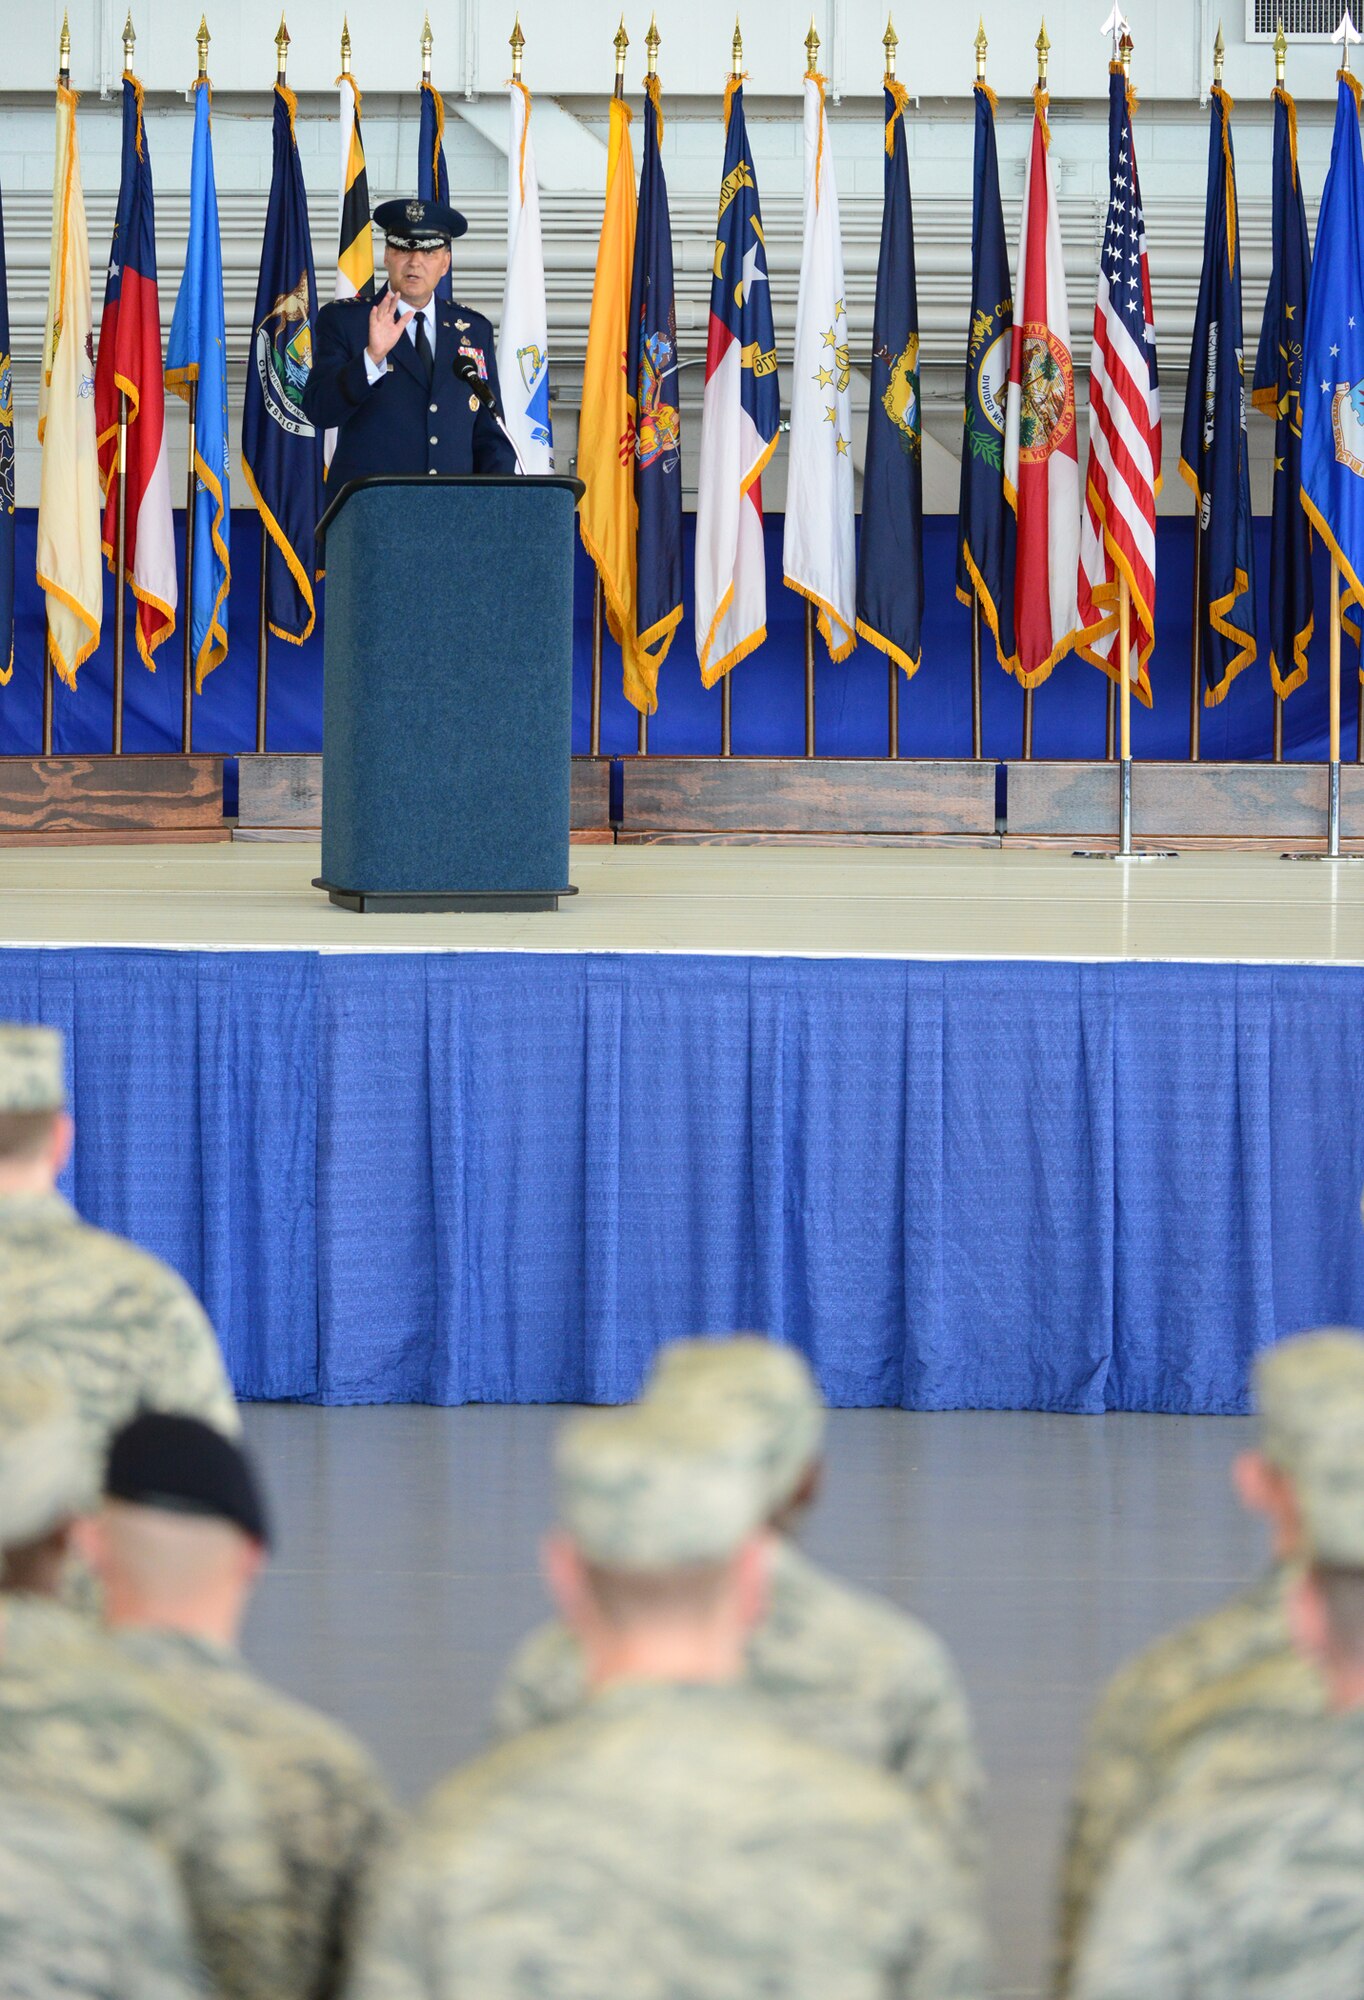 Lt. Gen. Bradley A. Heithold speaks to Air Commandos for the first time as the commander of Air Force Special Operations Command during a change of command ceremony held at Hurlburt Field, Fla., July 3, 2014.  Heithold becomes the AFSOC commander after a three-year tour as the headquarters U.S. Special Operations Command vice commander in Washington, D.C.  (U.S. Air Force photo by Master Sgt. Steven Pearsall)